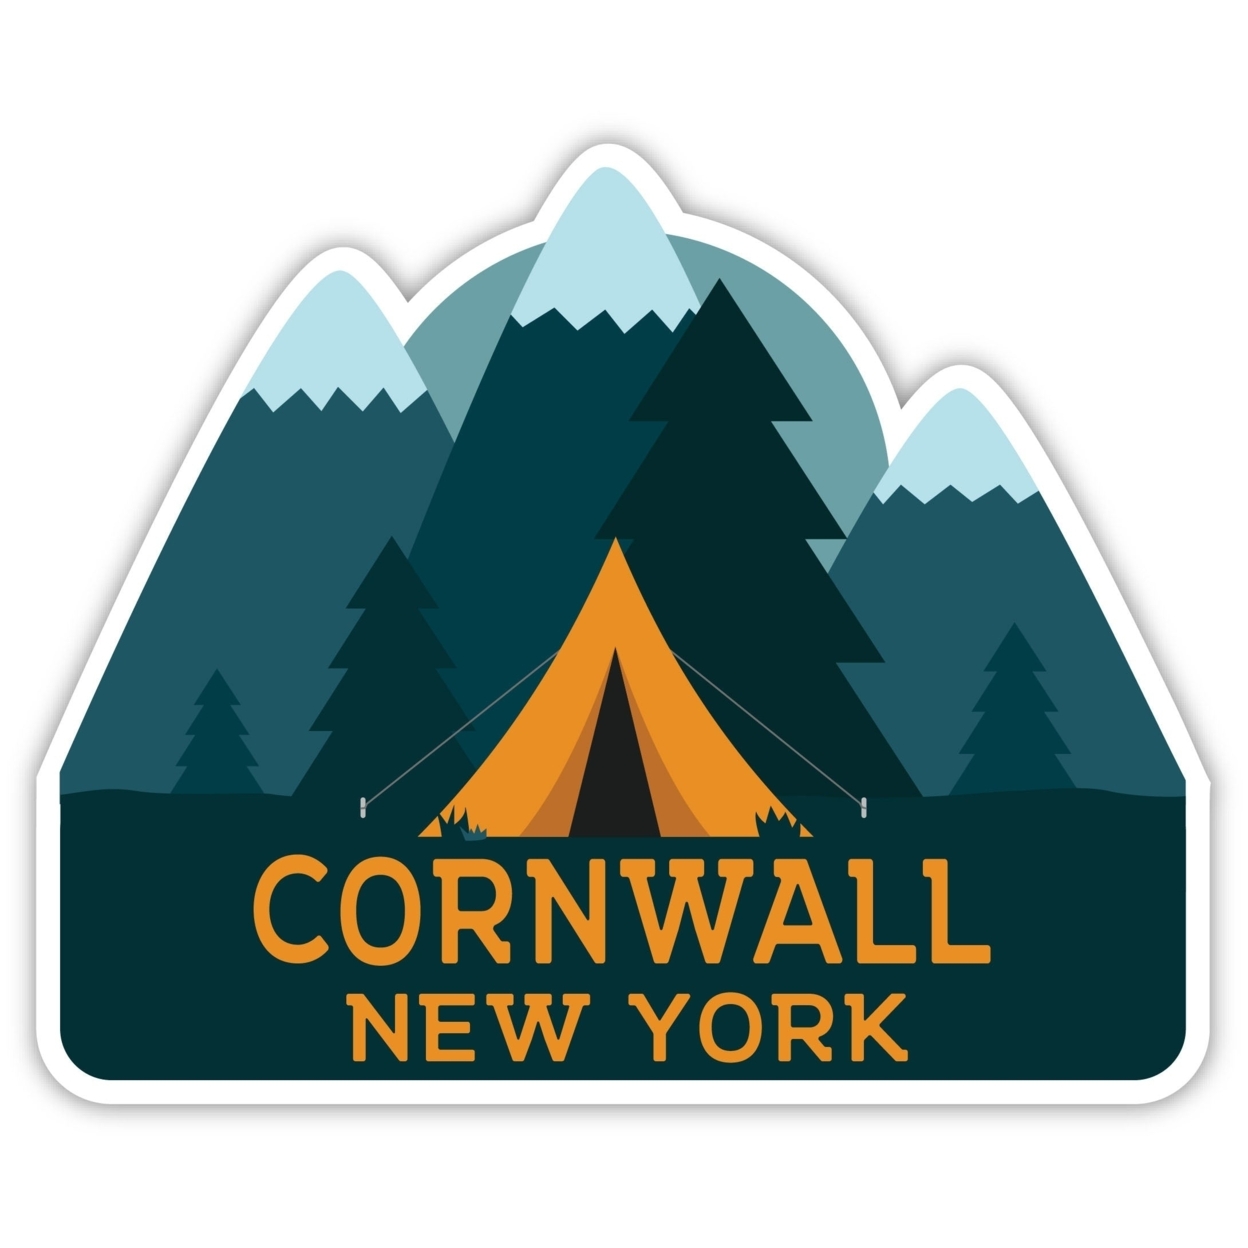 Cornwall New York Souvenir Decorative Stickers (Choose Theme And Size) - 4-Pack, 12-Inch, Tent